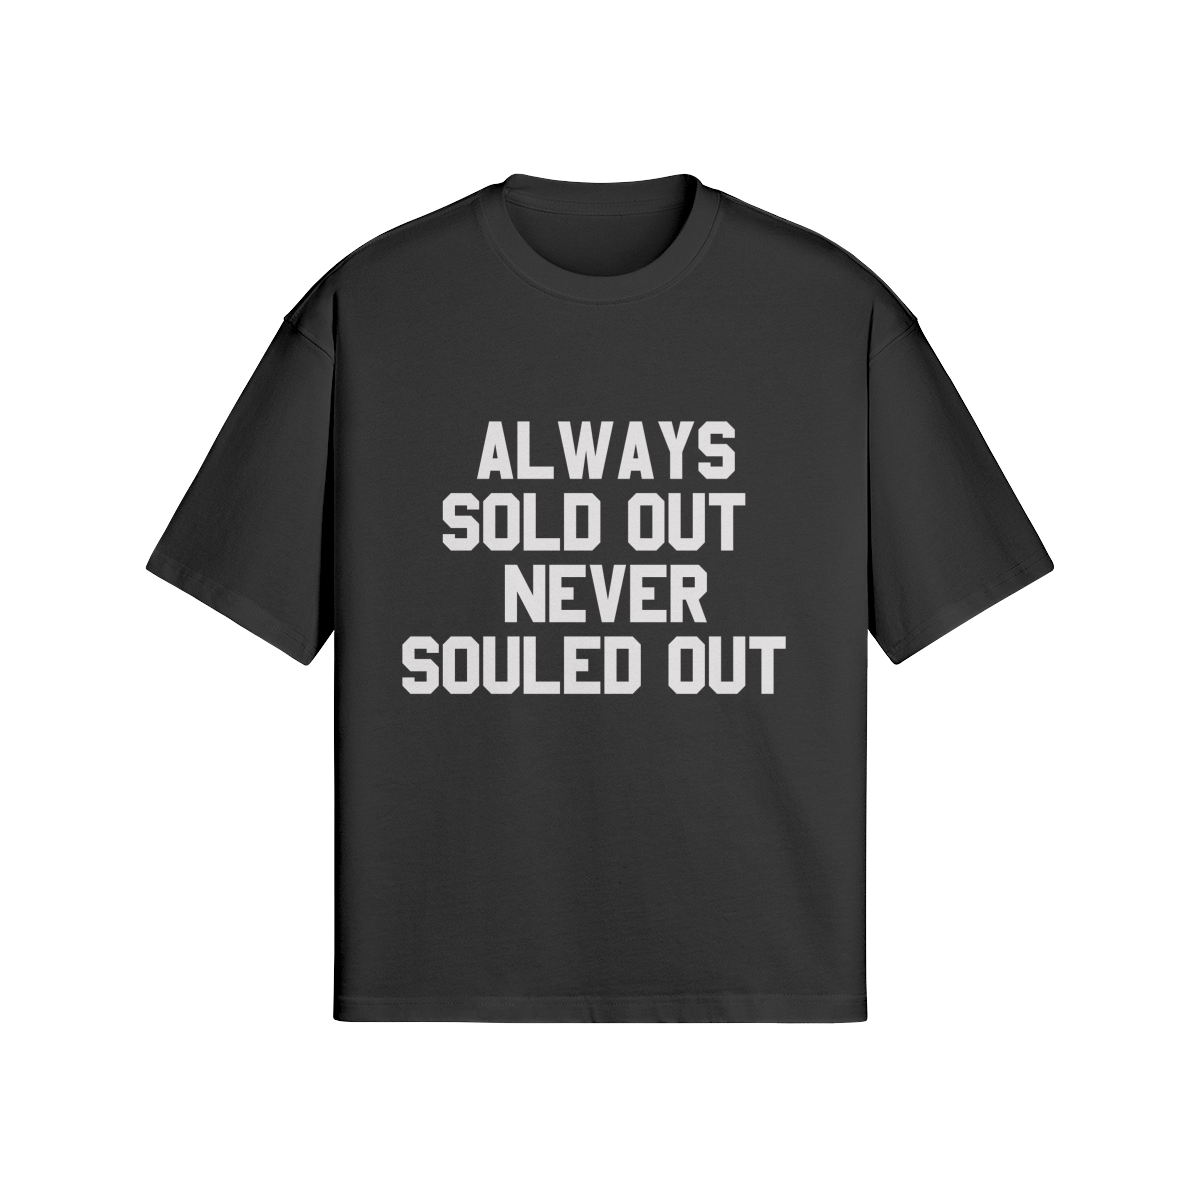 ALWAYS SOLD OUT NEVER SOULED OUT T-SHIRT BLACK